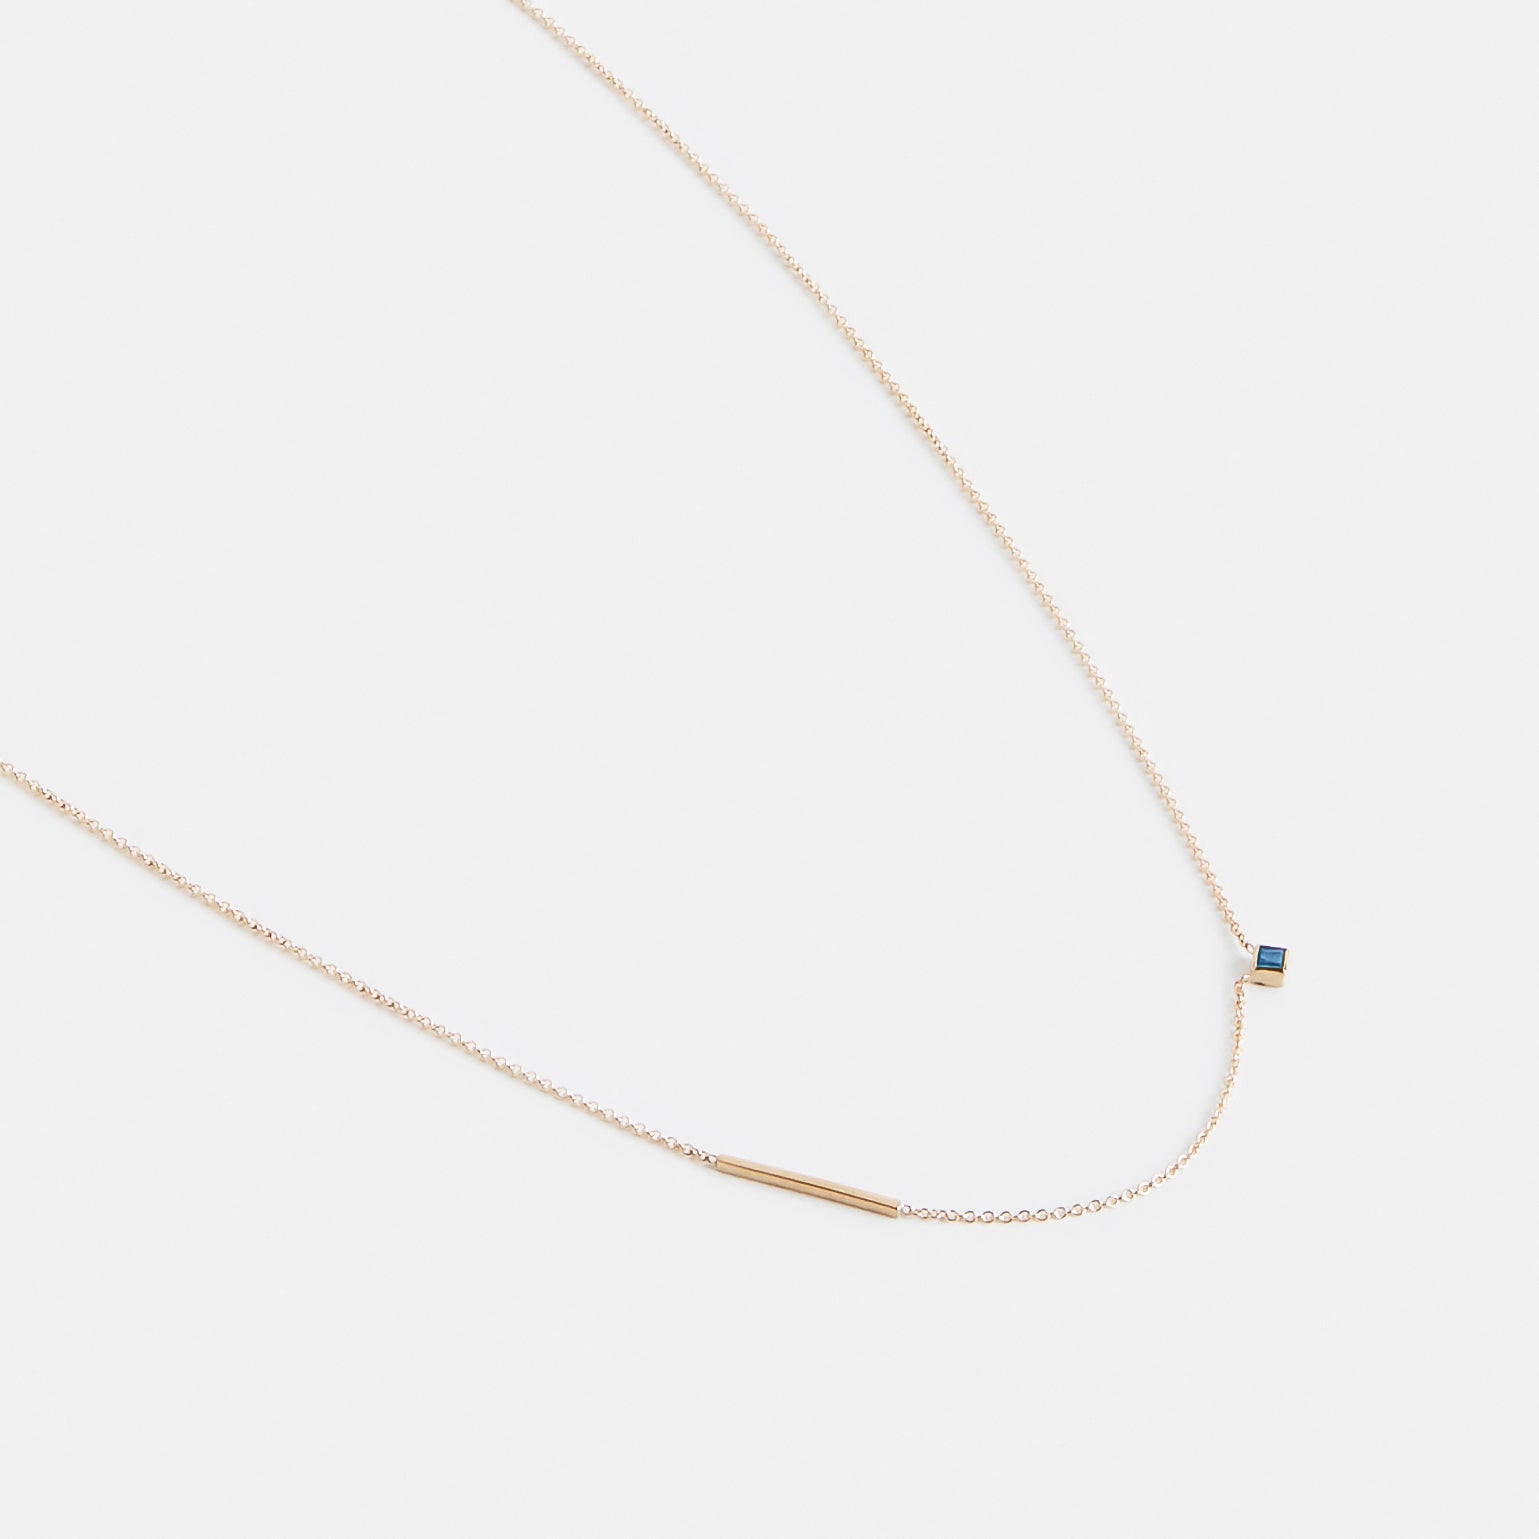 Inu Unique Necklace in 14k Gold Set with Sapphire By SHW Fine Jewelry NYC